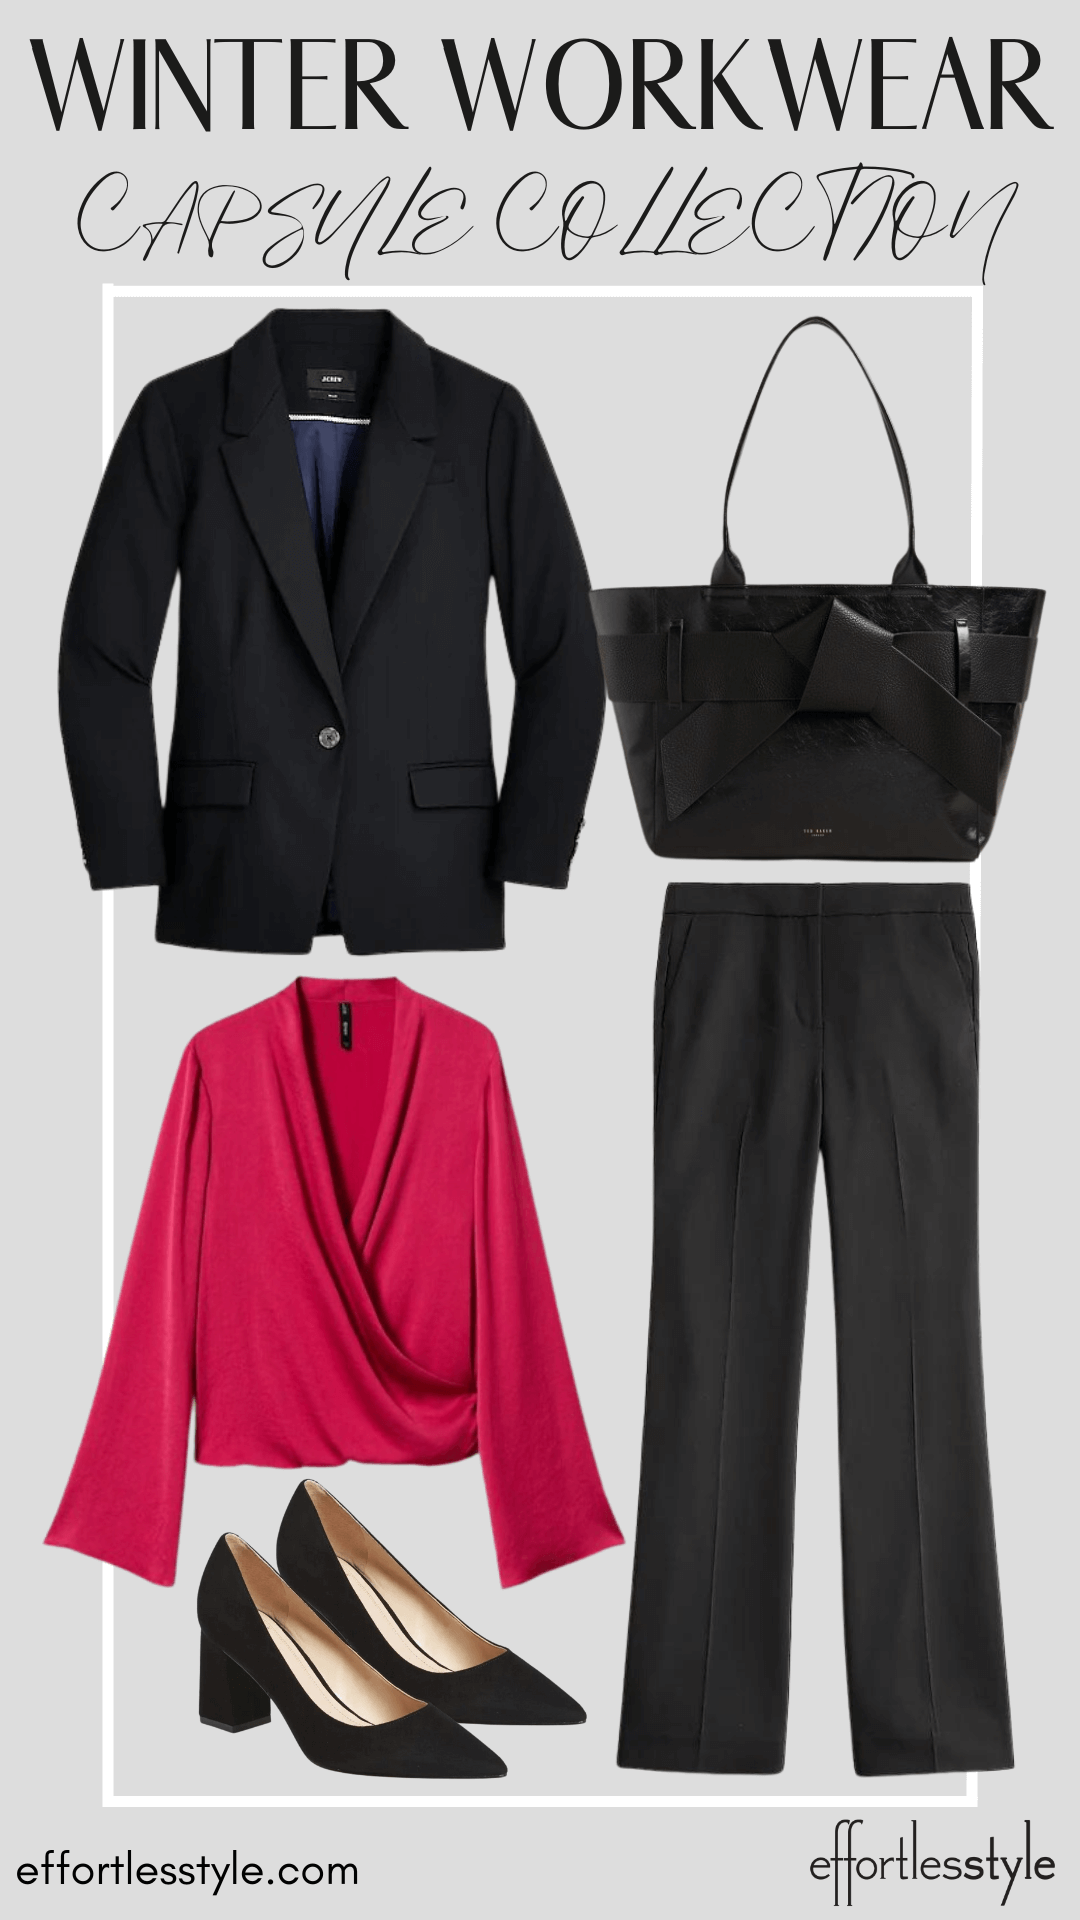 How To Wear Our Winter Workwear Capsule Wardrobe - Part 2 Long Sleeve Blouse & Black Pants & Black Blazer personal stylists share style inspiration for black suit how to make your black suit more interesting for work how to add color to your black suit